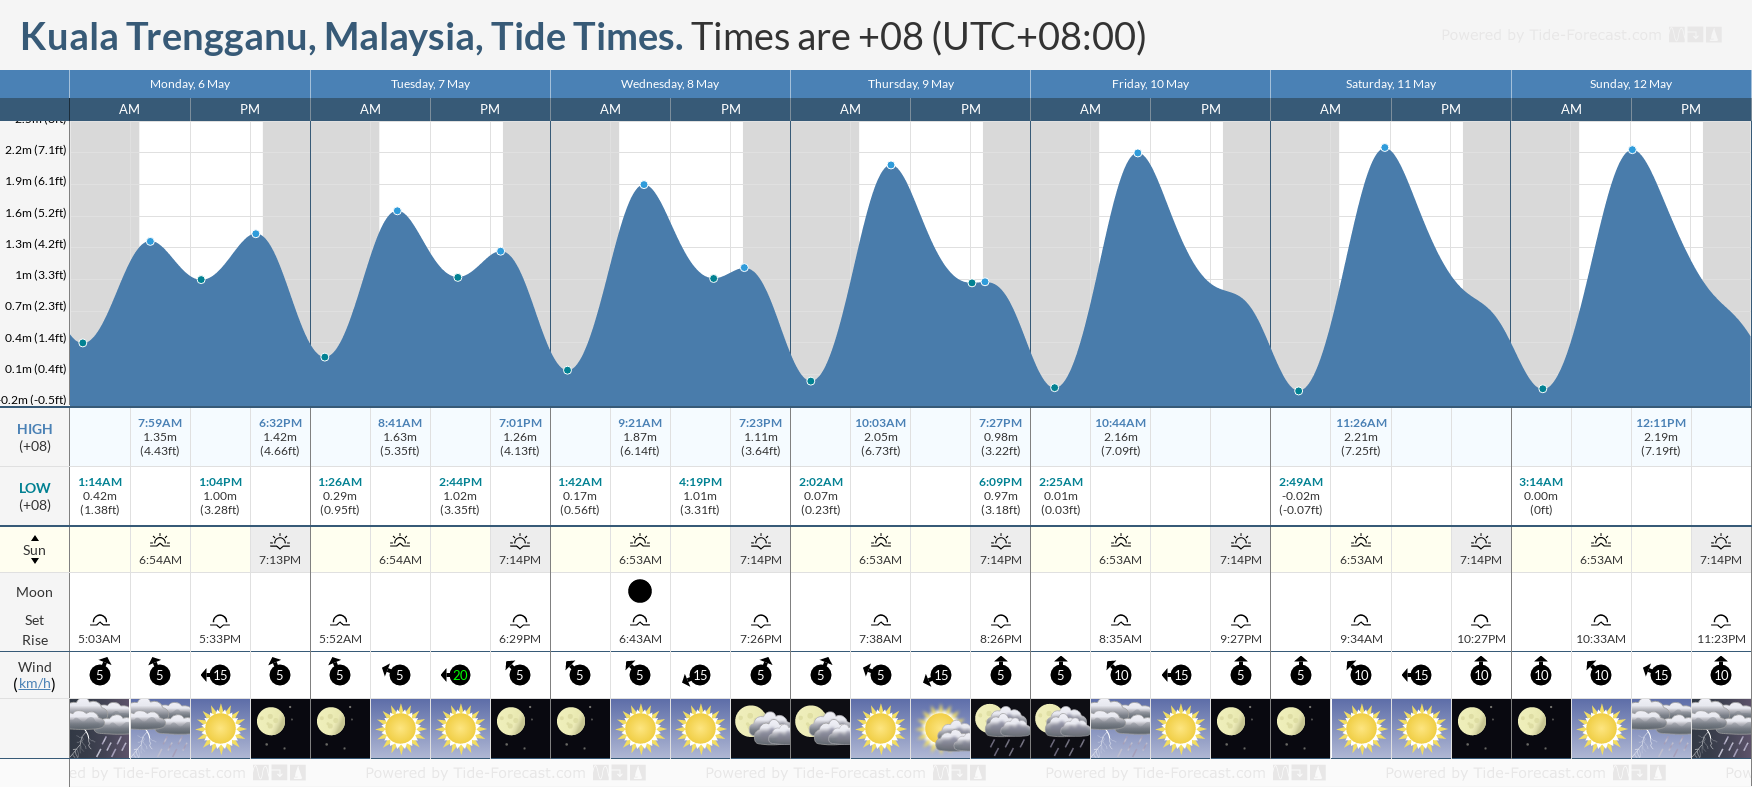 Kuala Trengganu, Malaysia Tide Chart including high and low tide tide times for the next 7 days